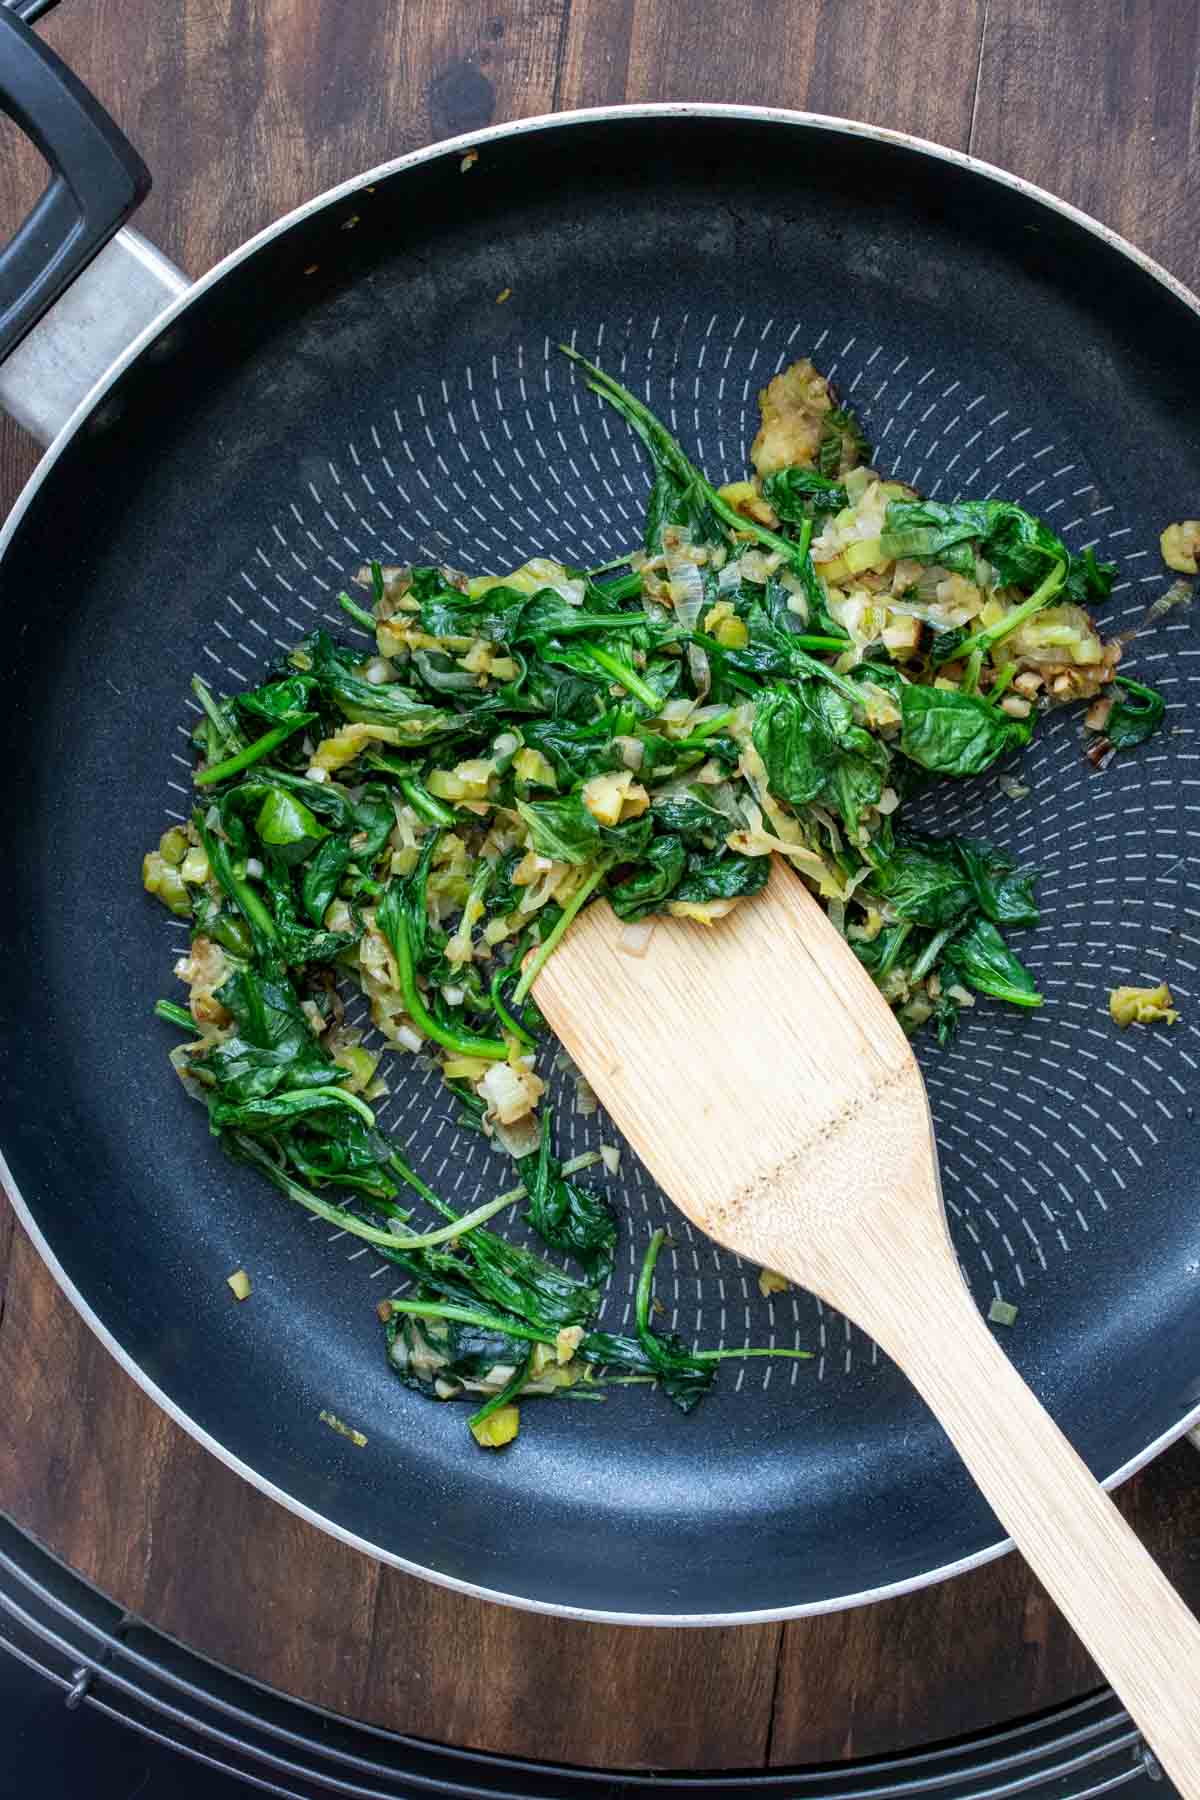 Wooden spoon mixing greens in a pan as they cook